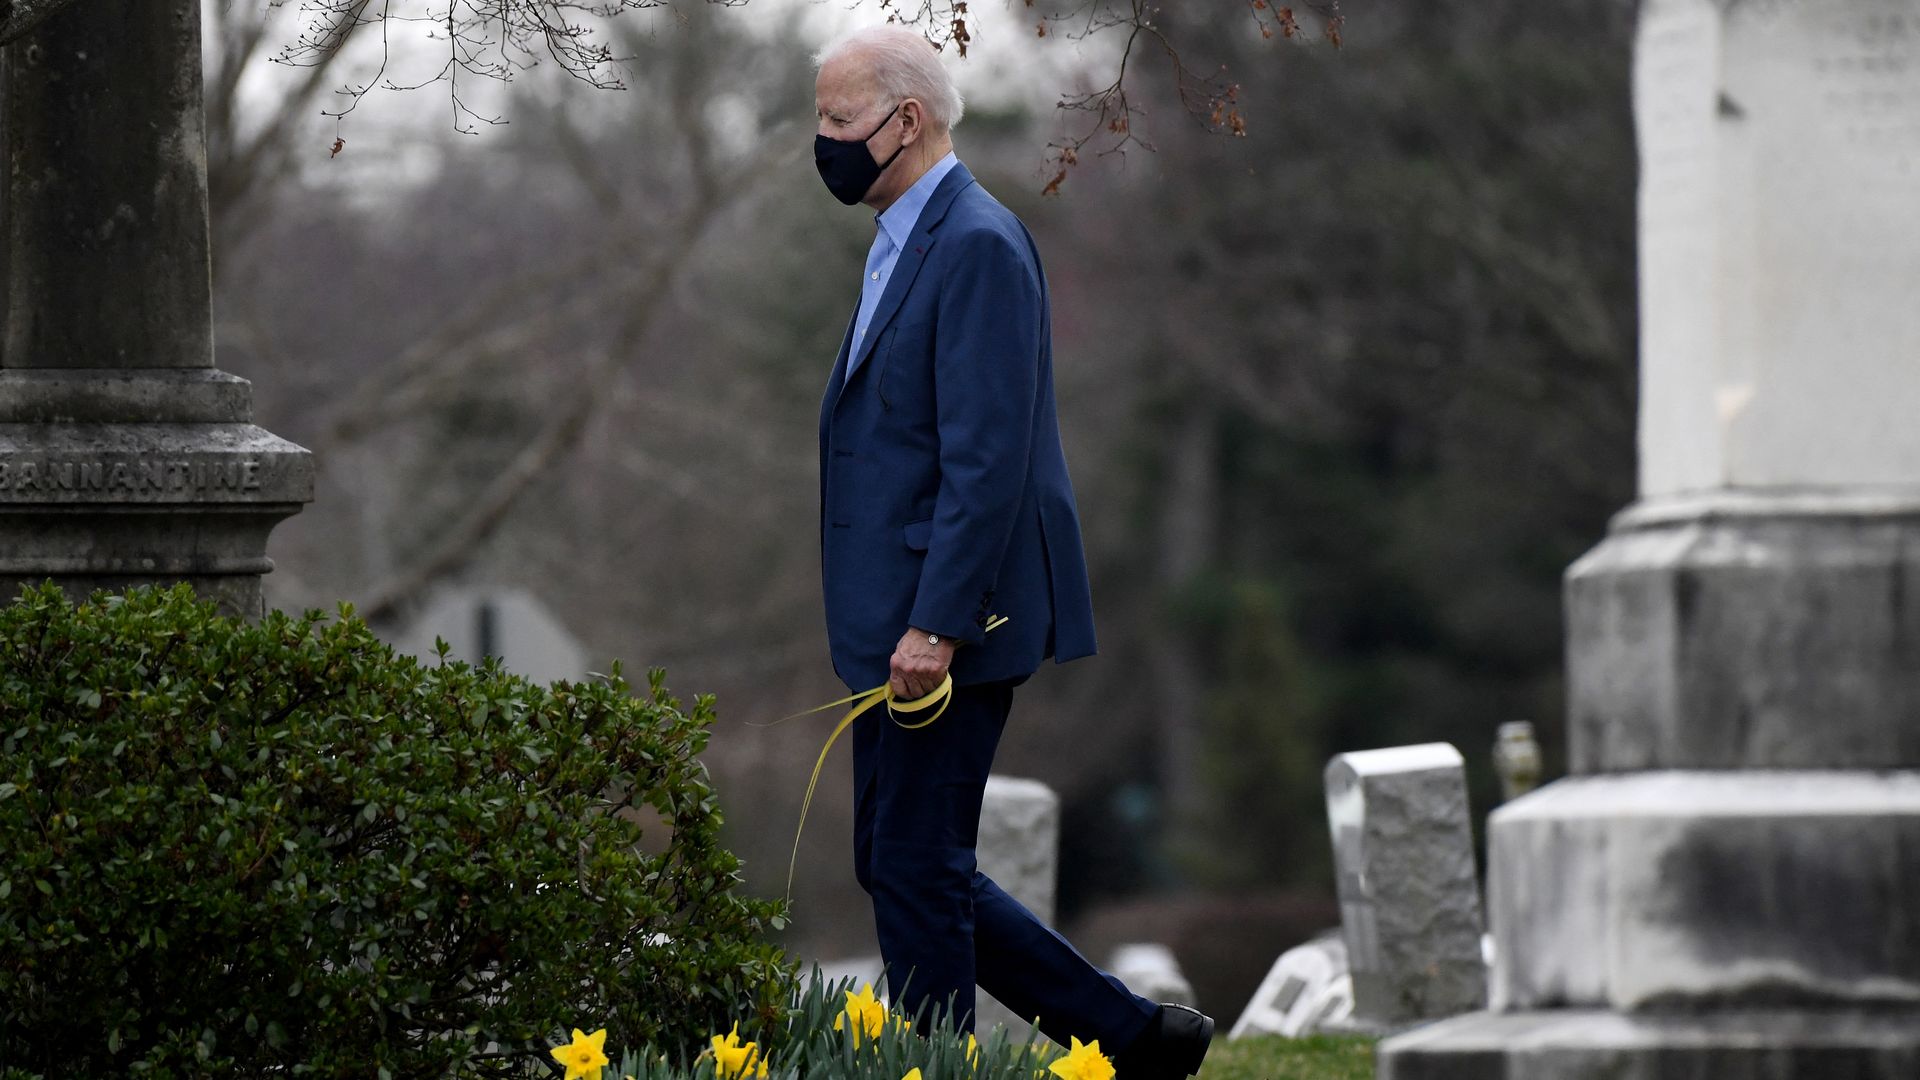 President Biden is seen leaving church on Saturday carrying a palm frond to mark Palm Sunday.